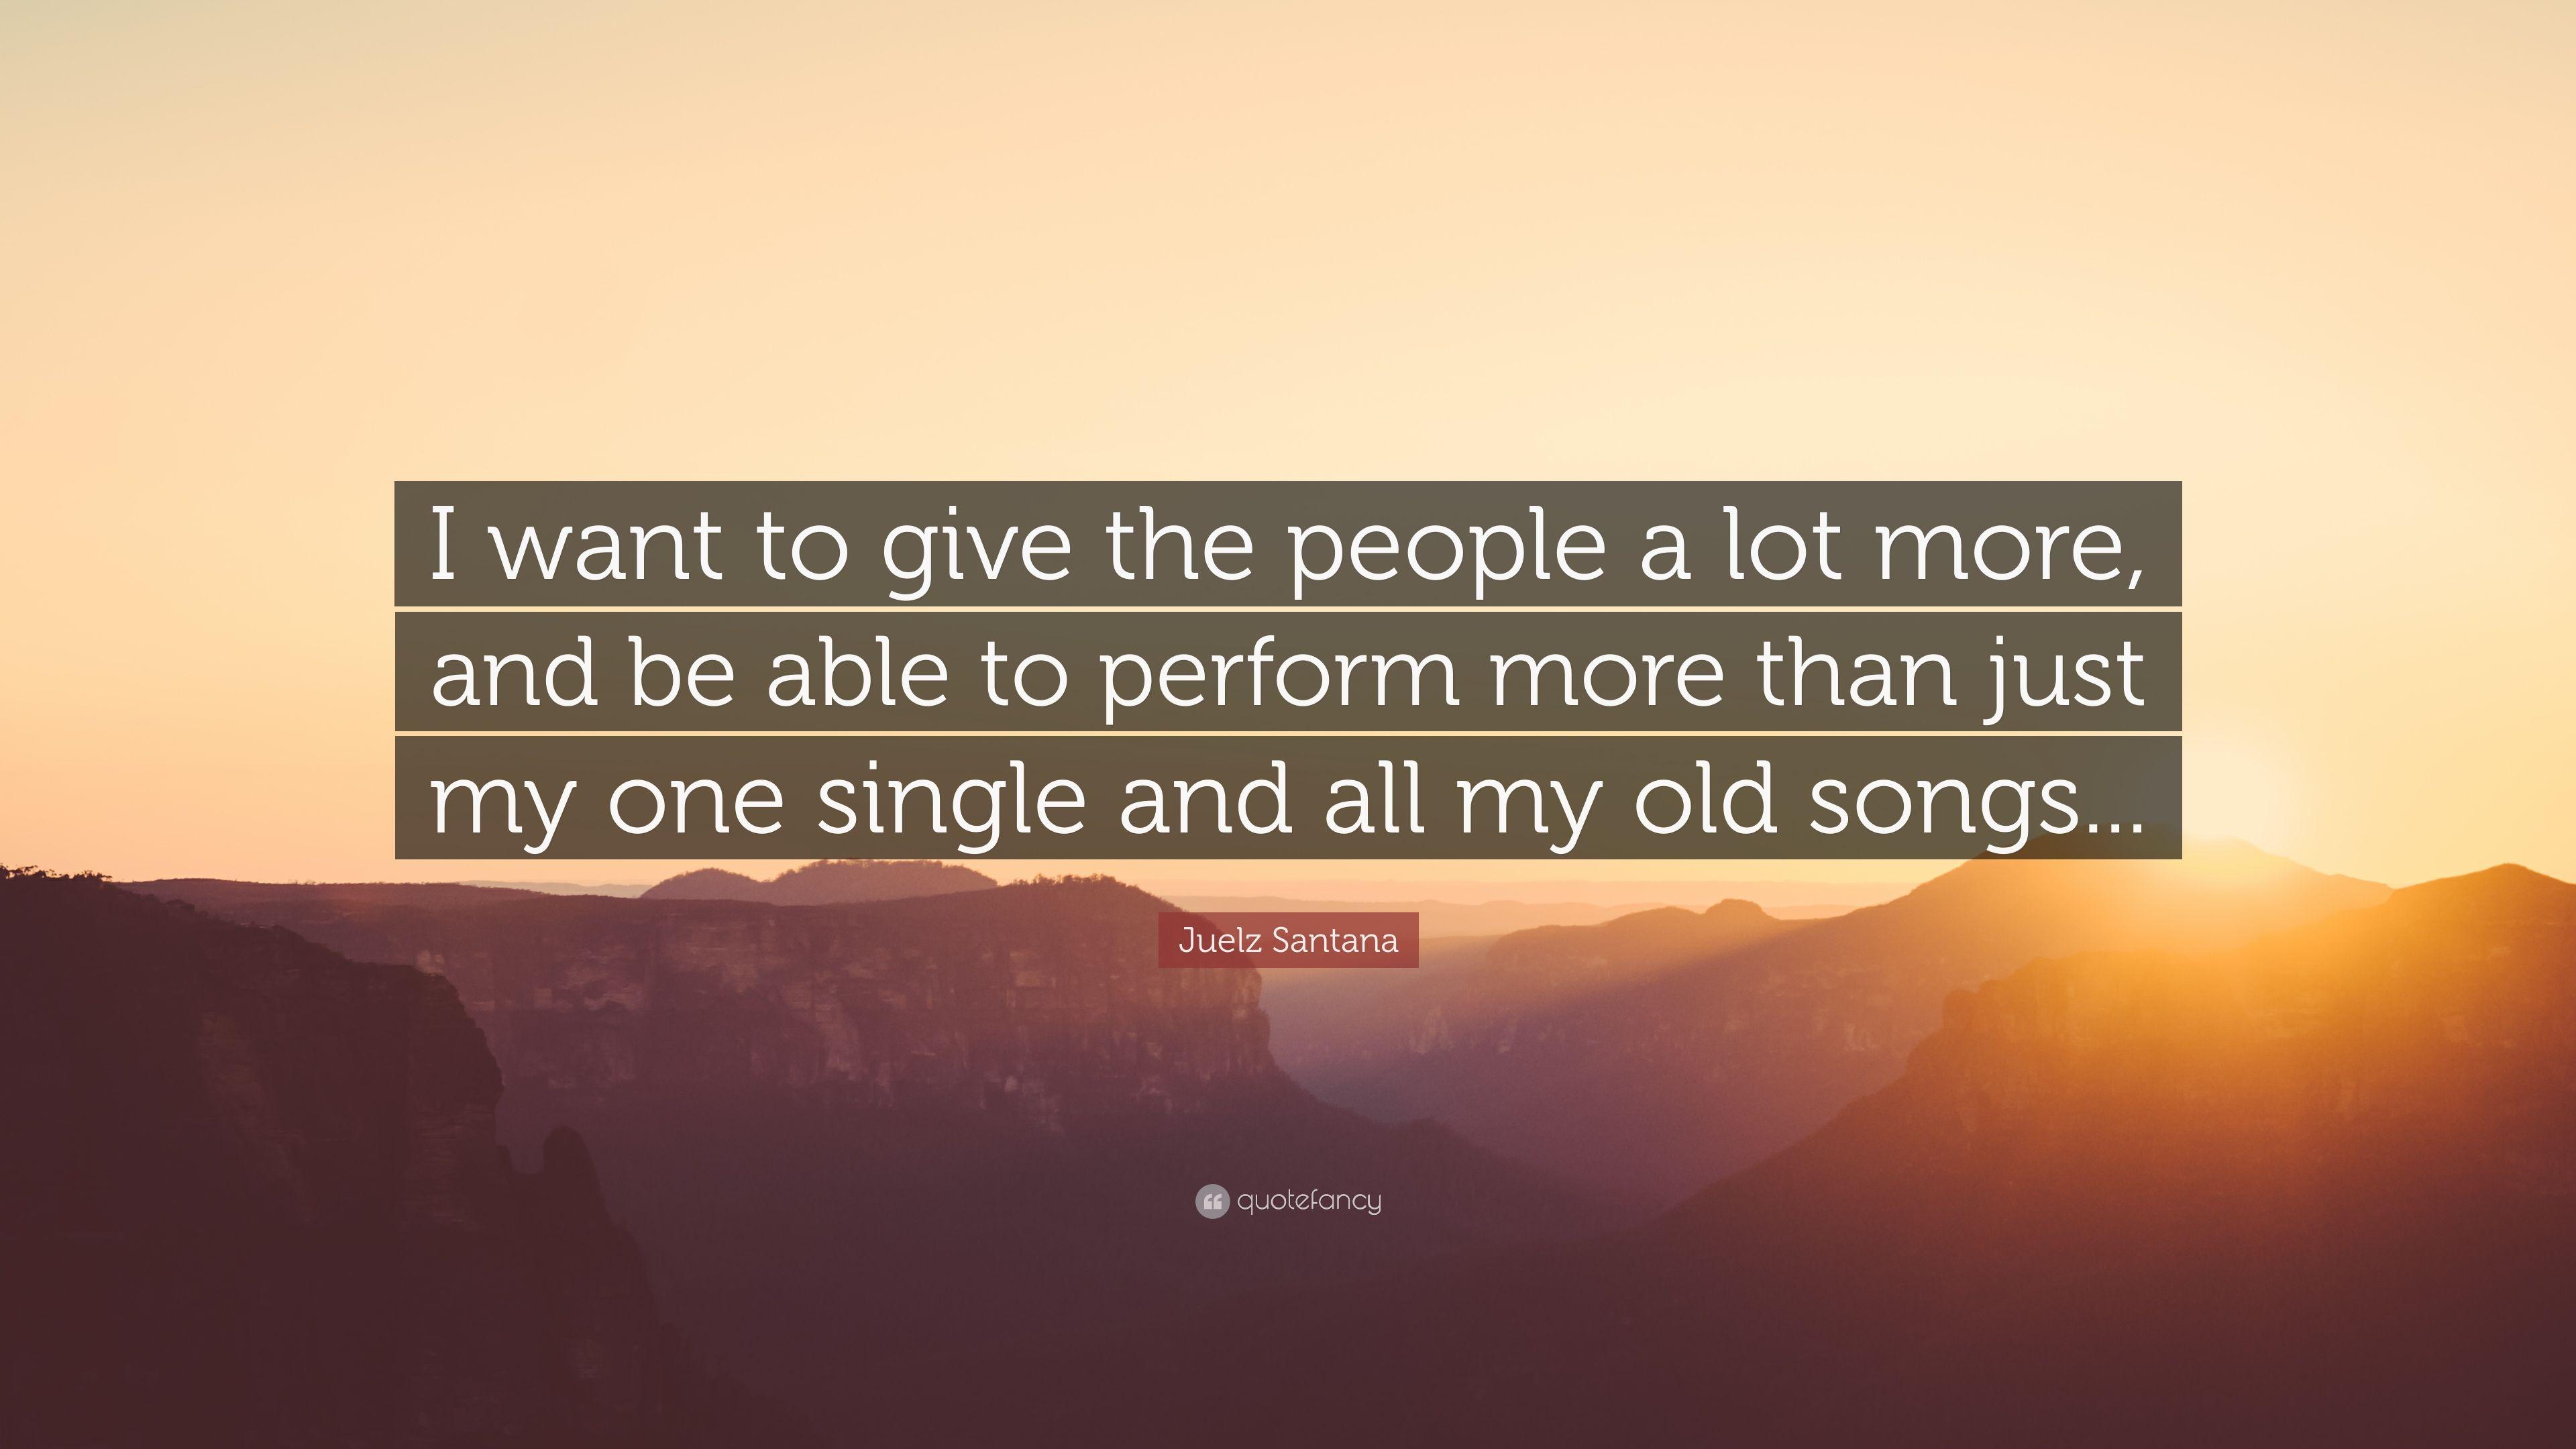 Juelz Santana Quote: “I want to give the people a lot more, and be